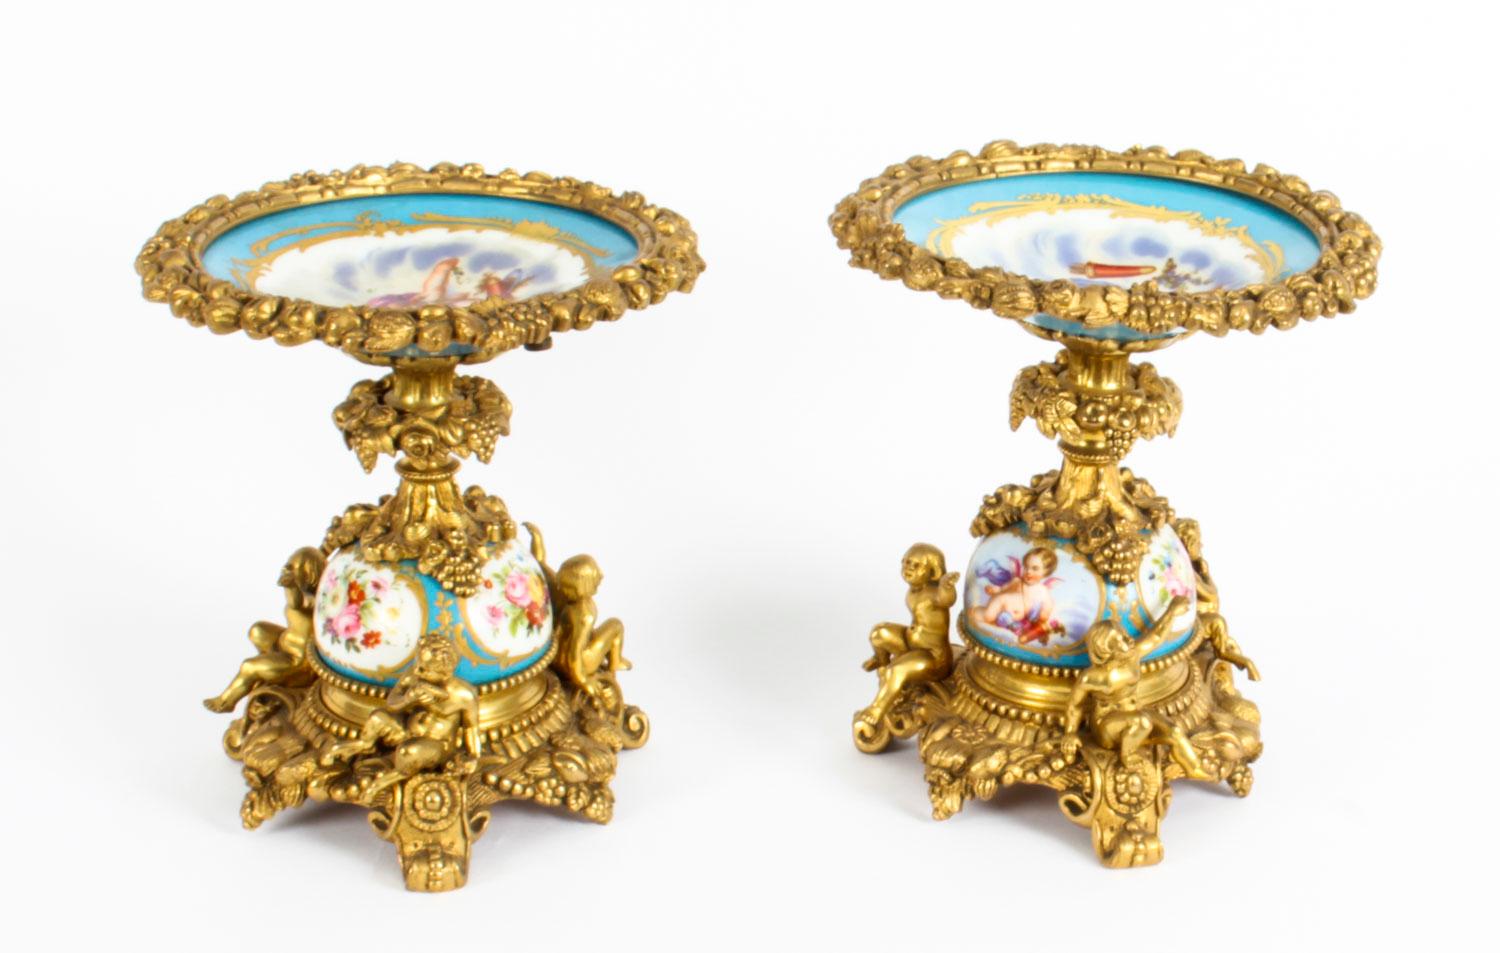 This is a impressive pair of antique Sevres Bleu Celeste Porcelain tazza's with ormolu mounts, circa 1880 in date.

The shallow circular dishes feature hand painted cherubs on a bleu celeste ground with gilt high lights and decorative ormolu mounts